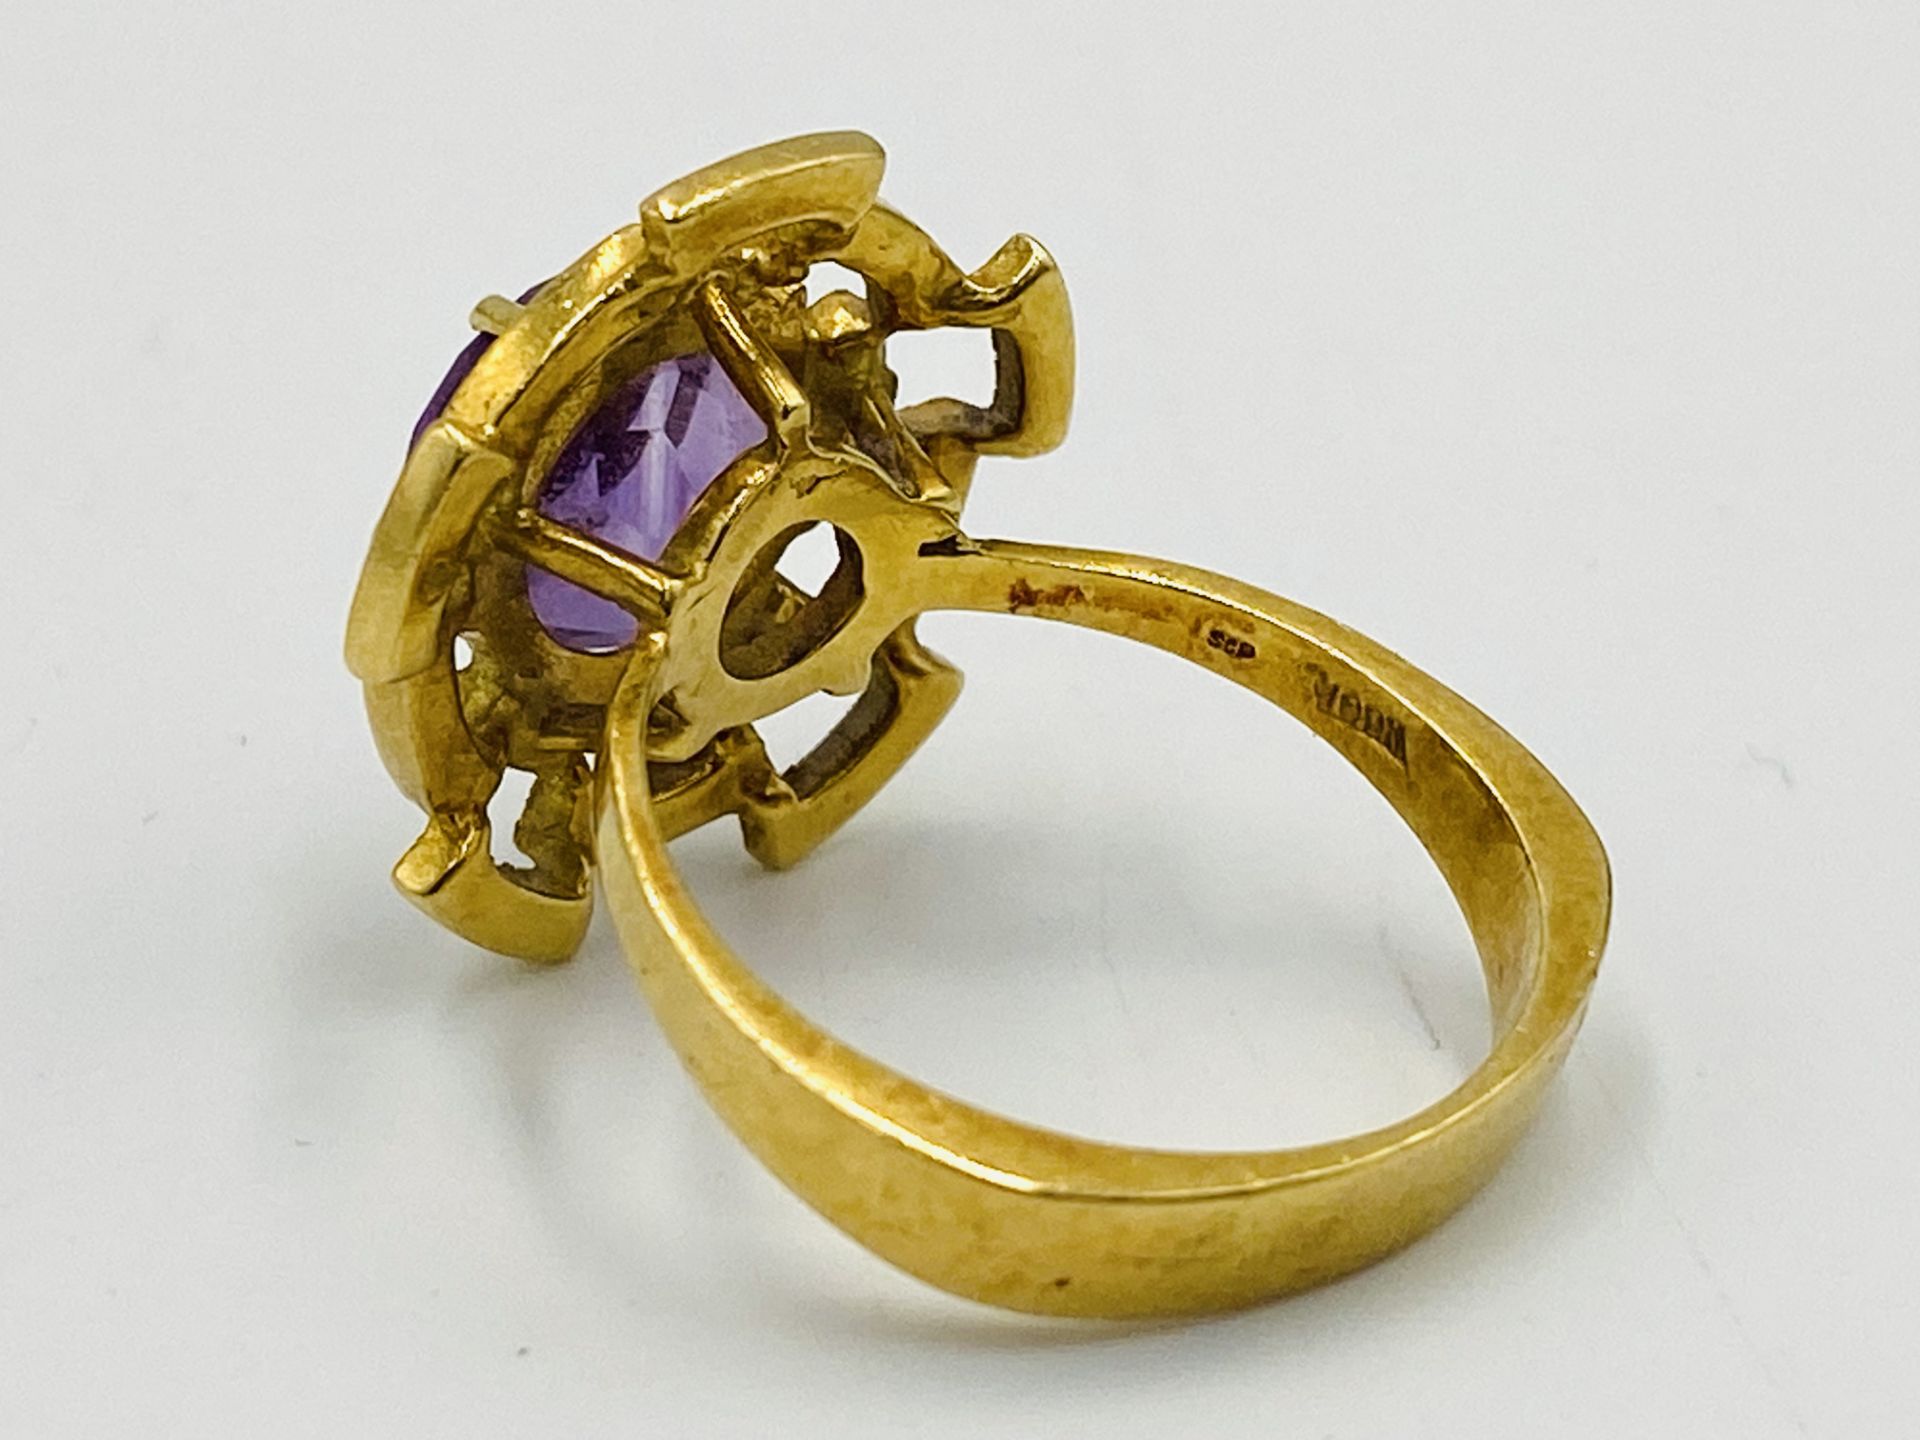 1970's 18ct gold ring with central amethyst stone - Image 4 of 4